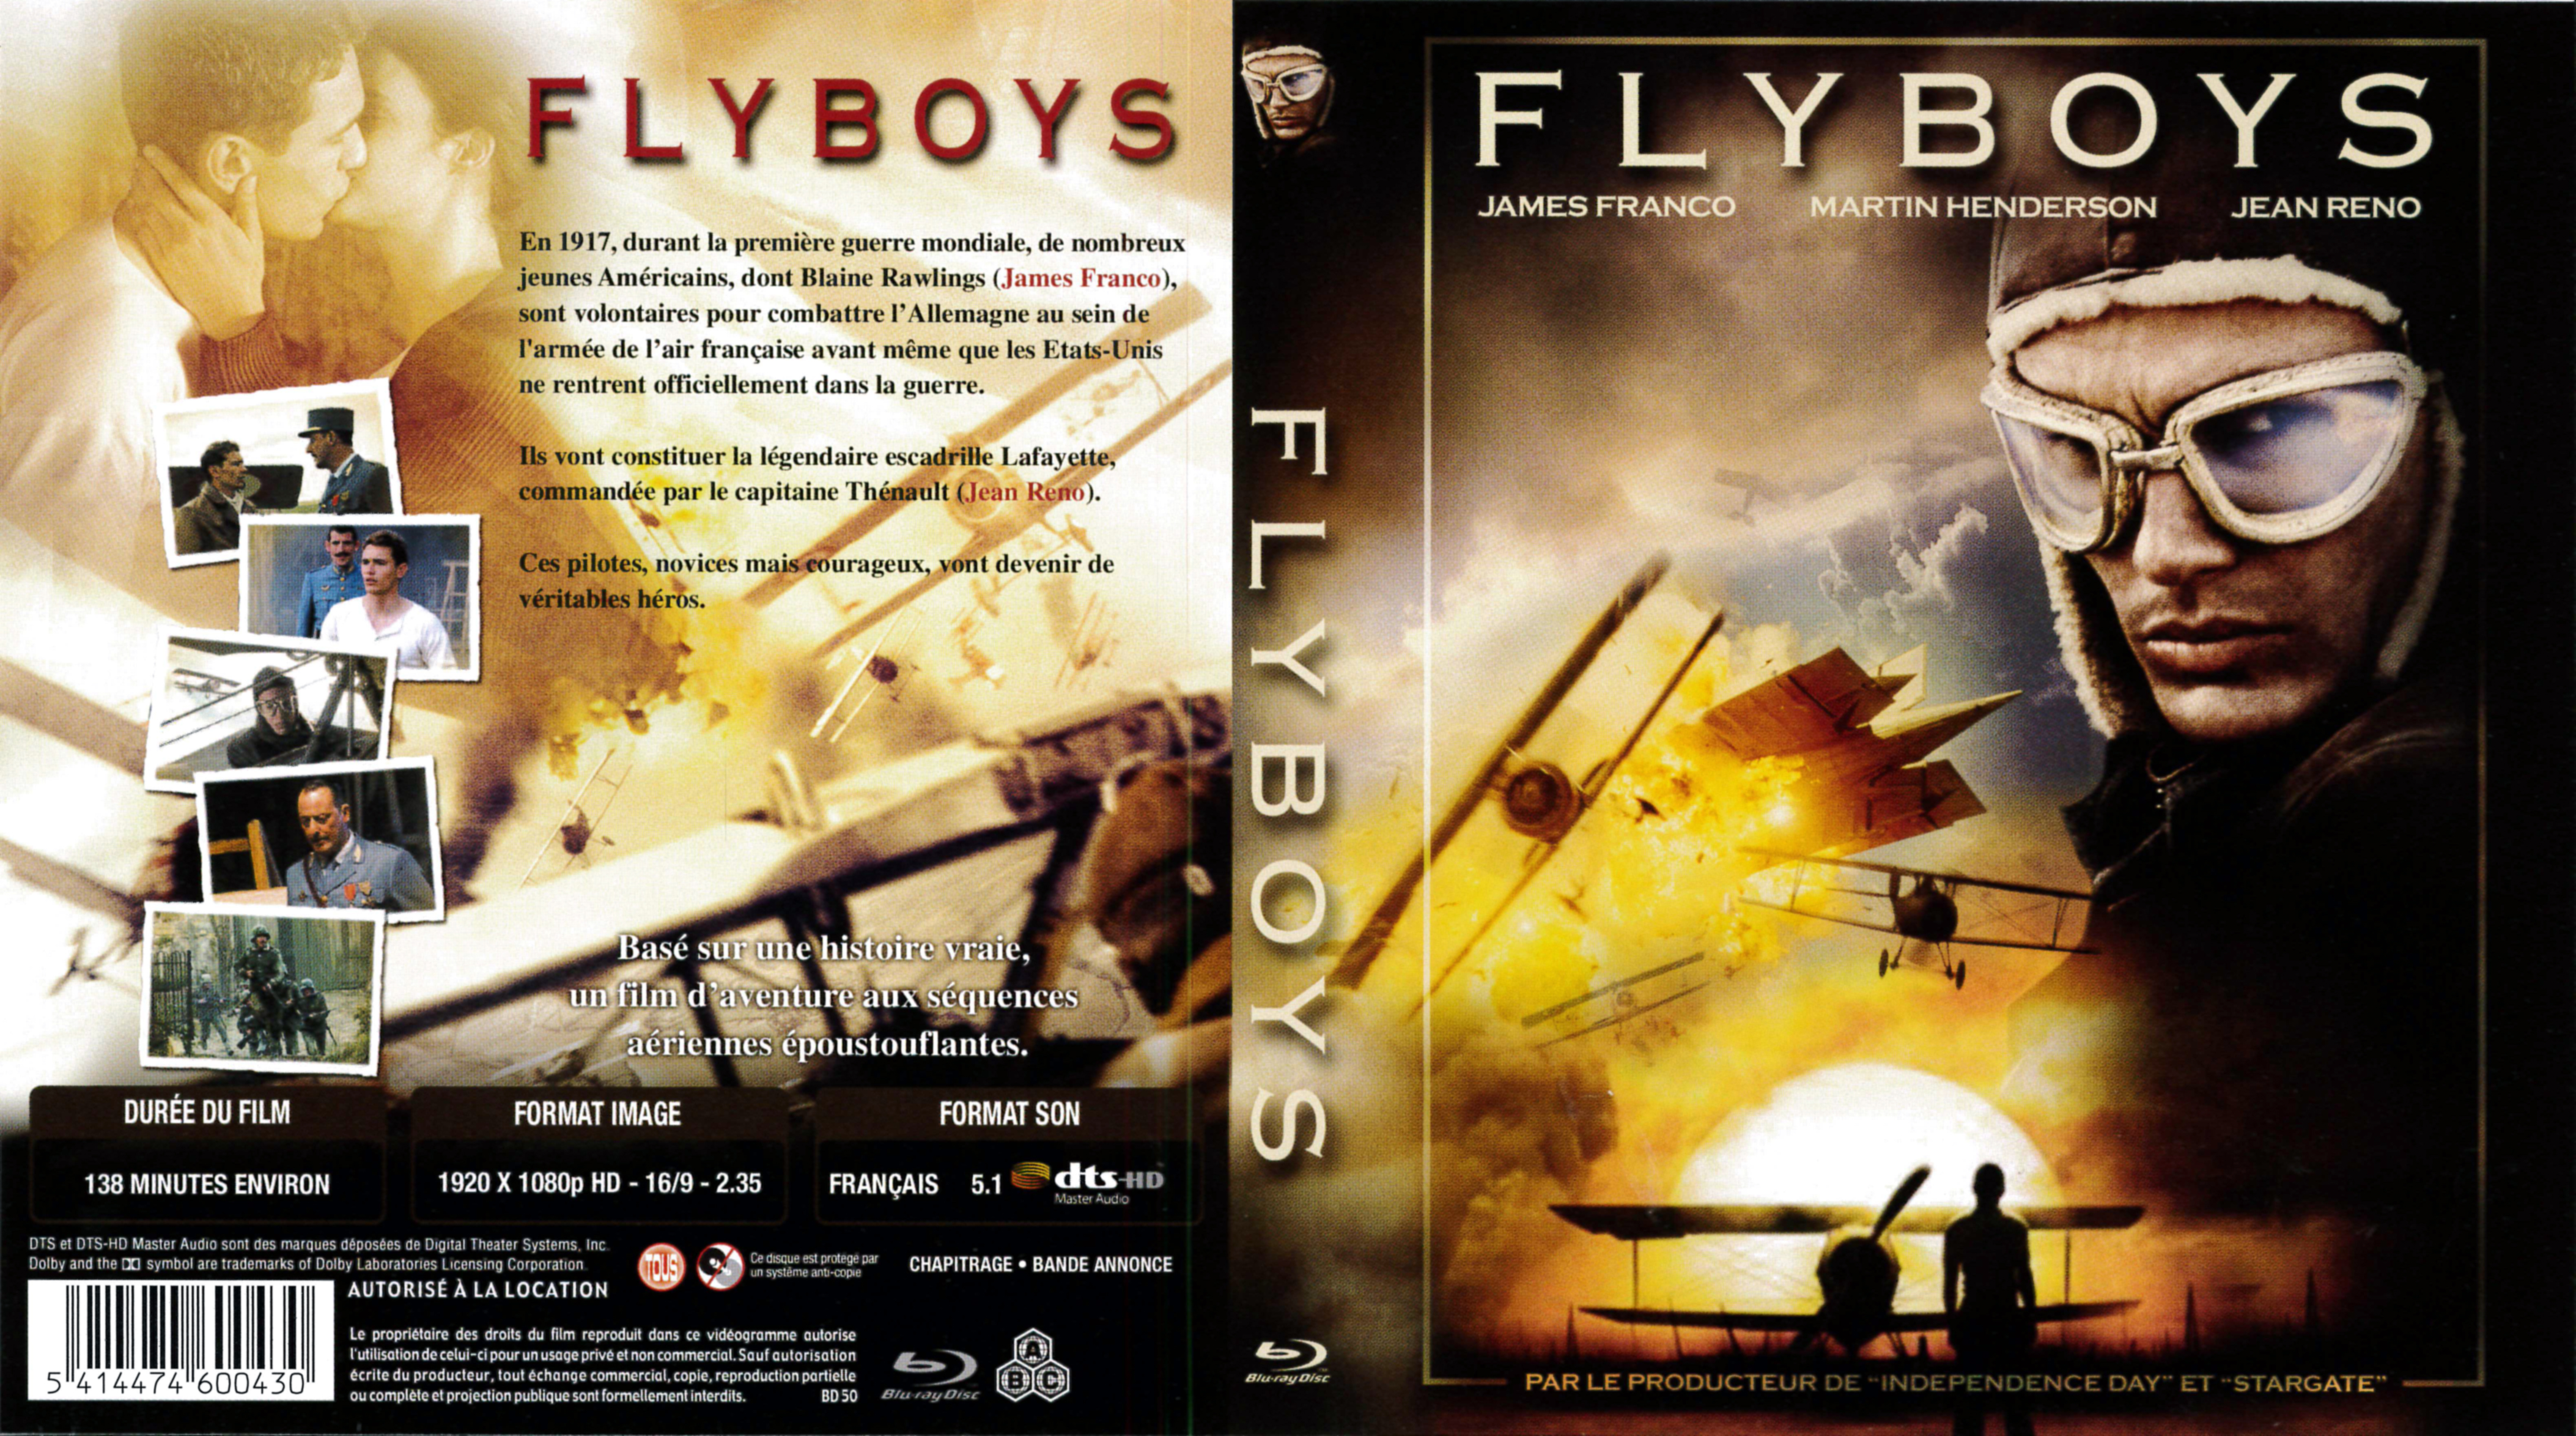 Jaquette DVD Flyboys (BLU-RAY)